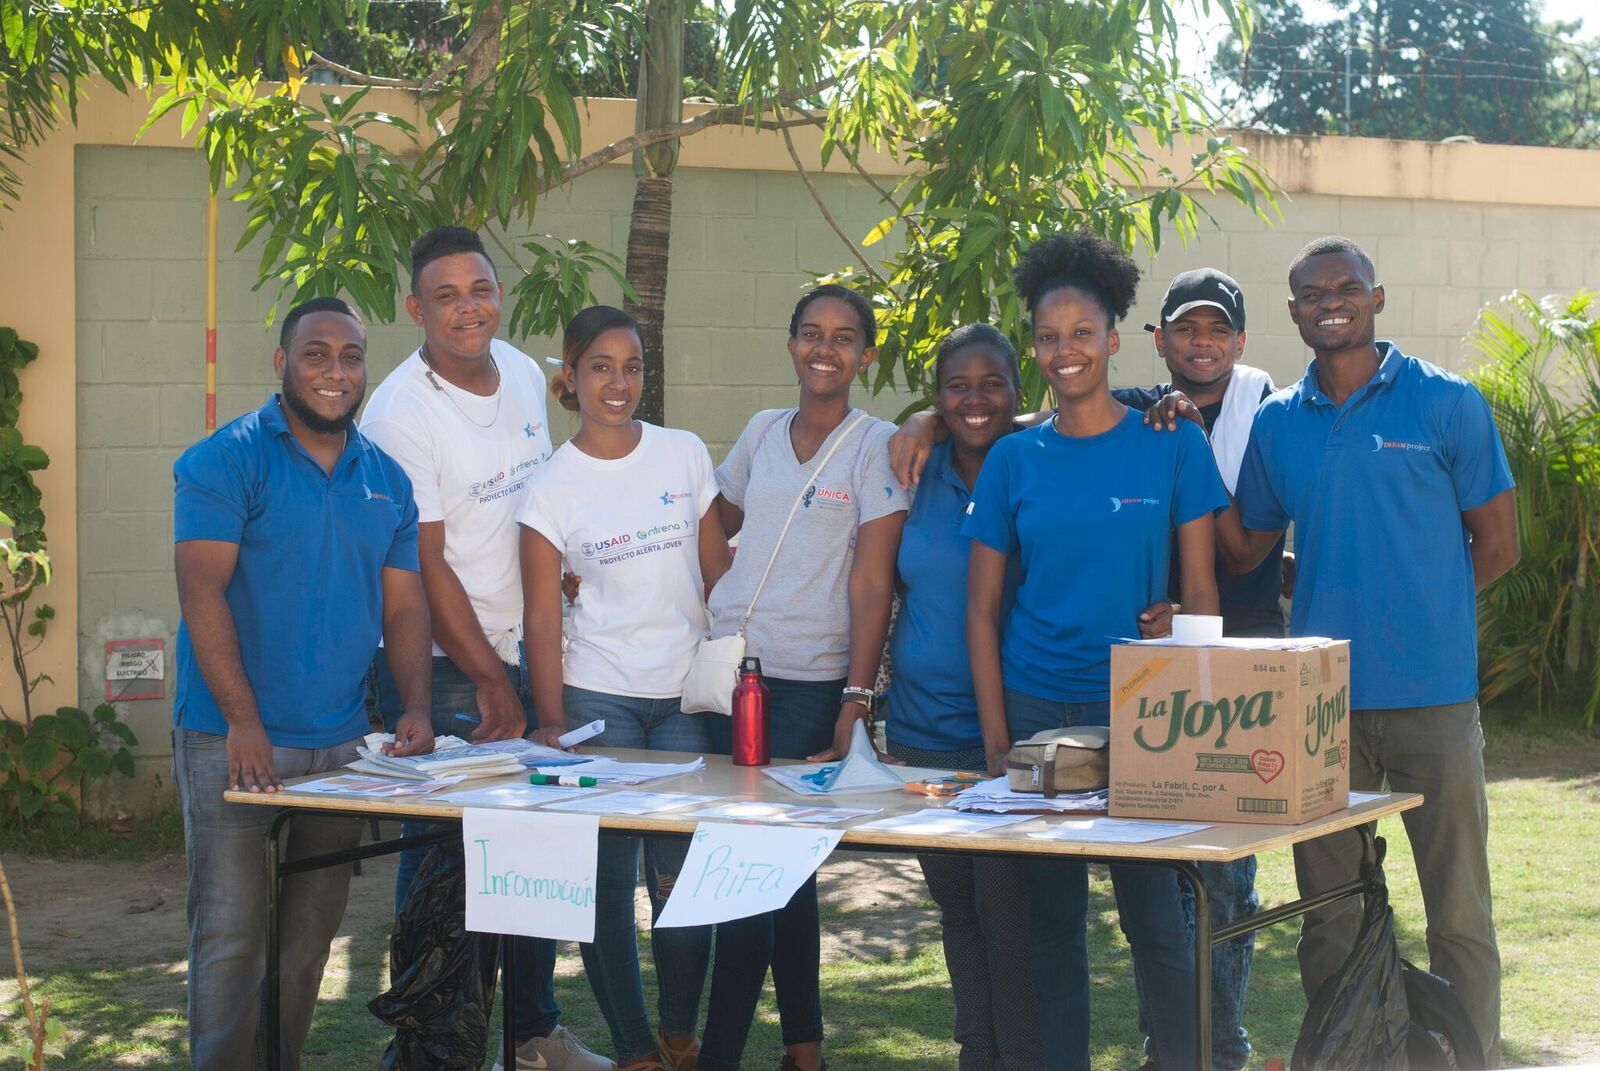 Eight young leaders stand behind a table, posing, at a community health fair